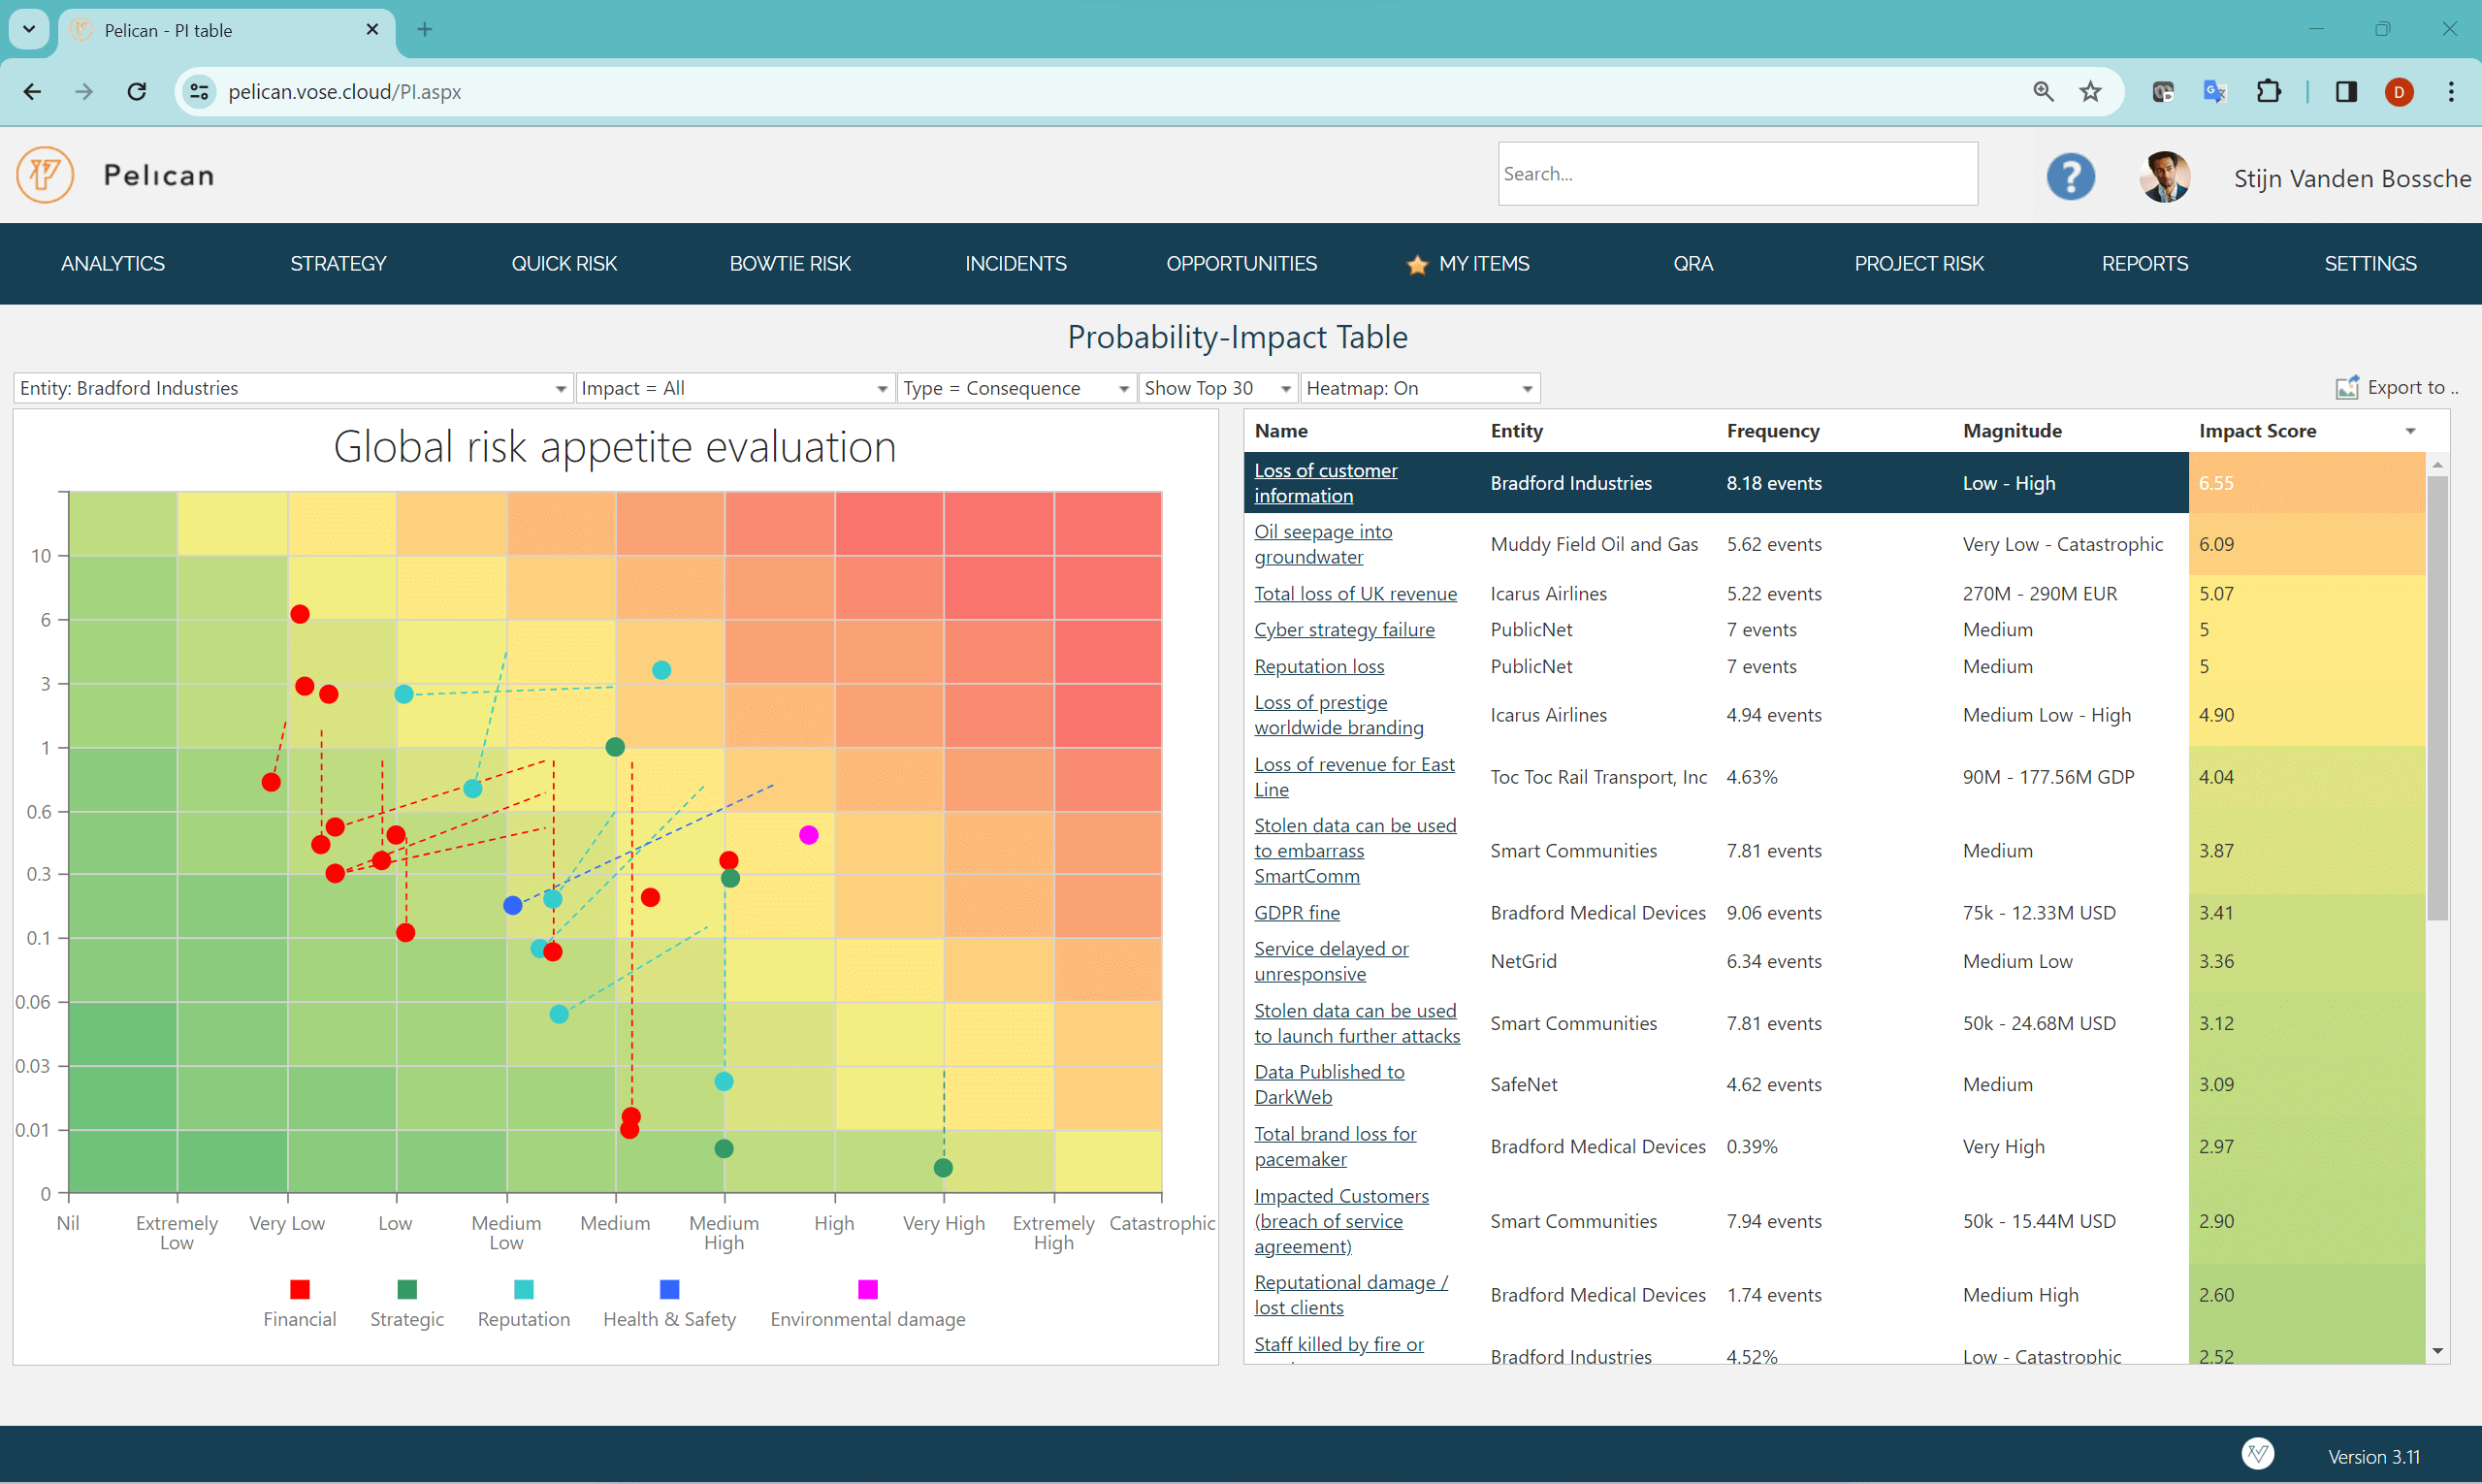 Quantitative heat map showing top risks and effect of controlas and mitigations